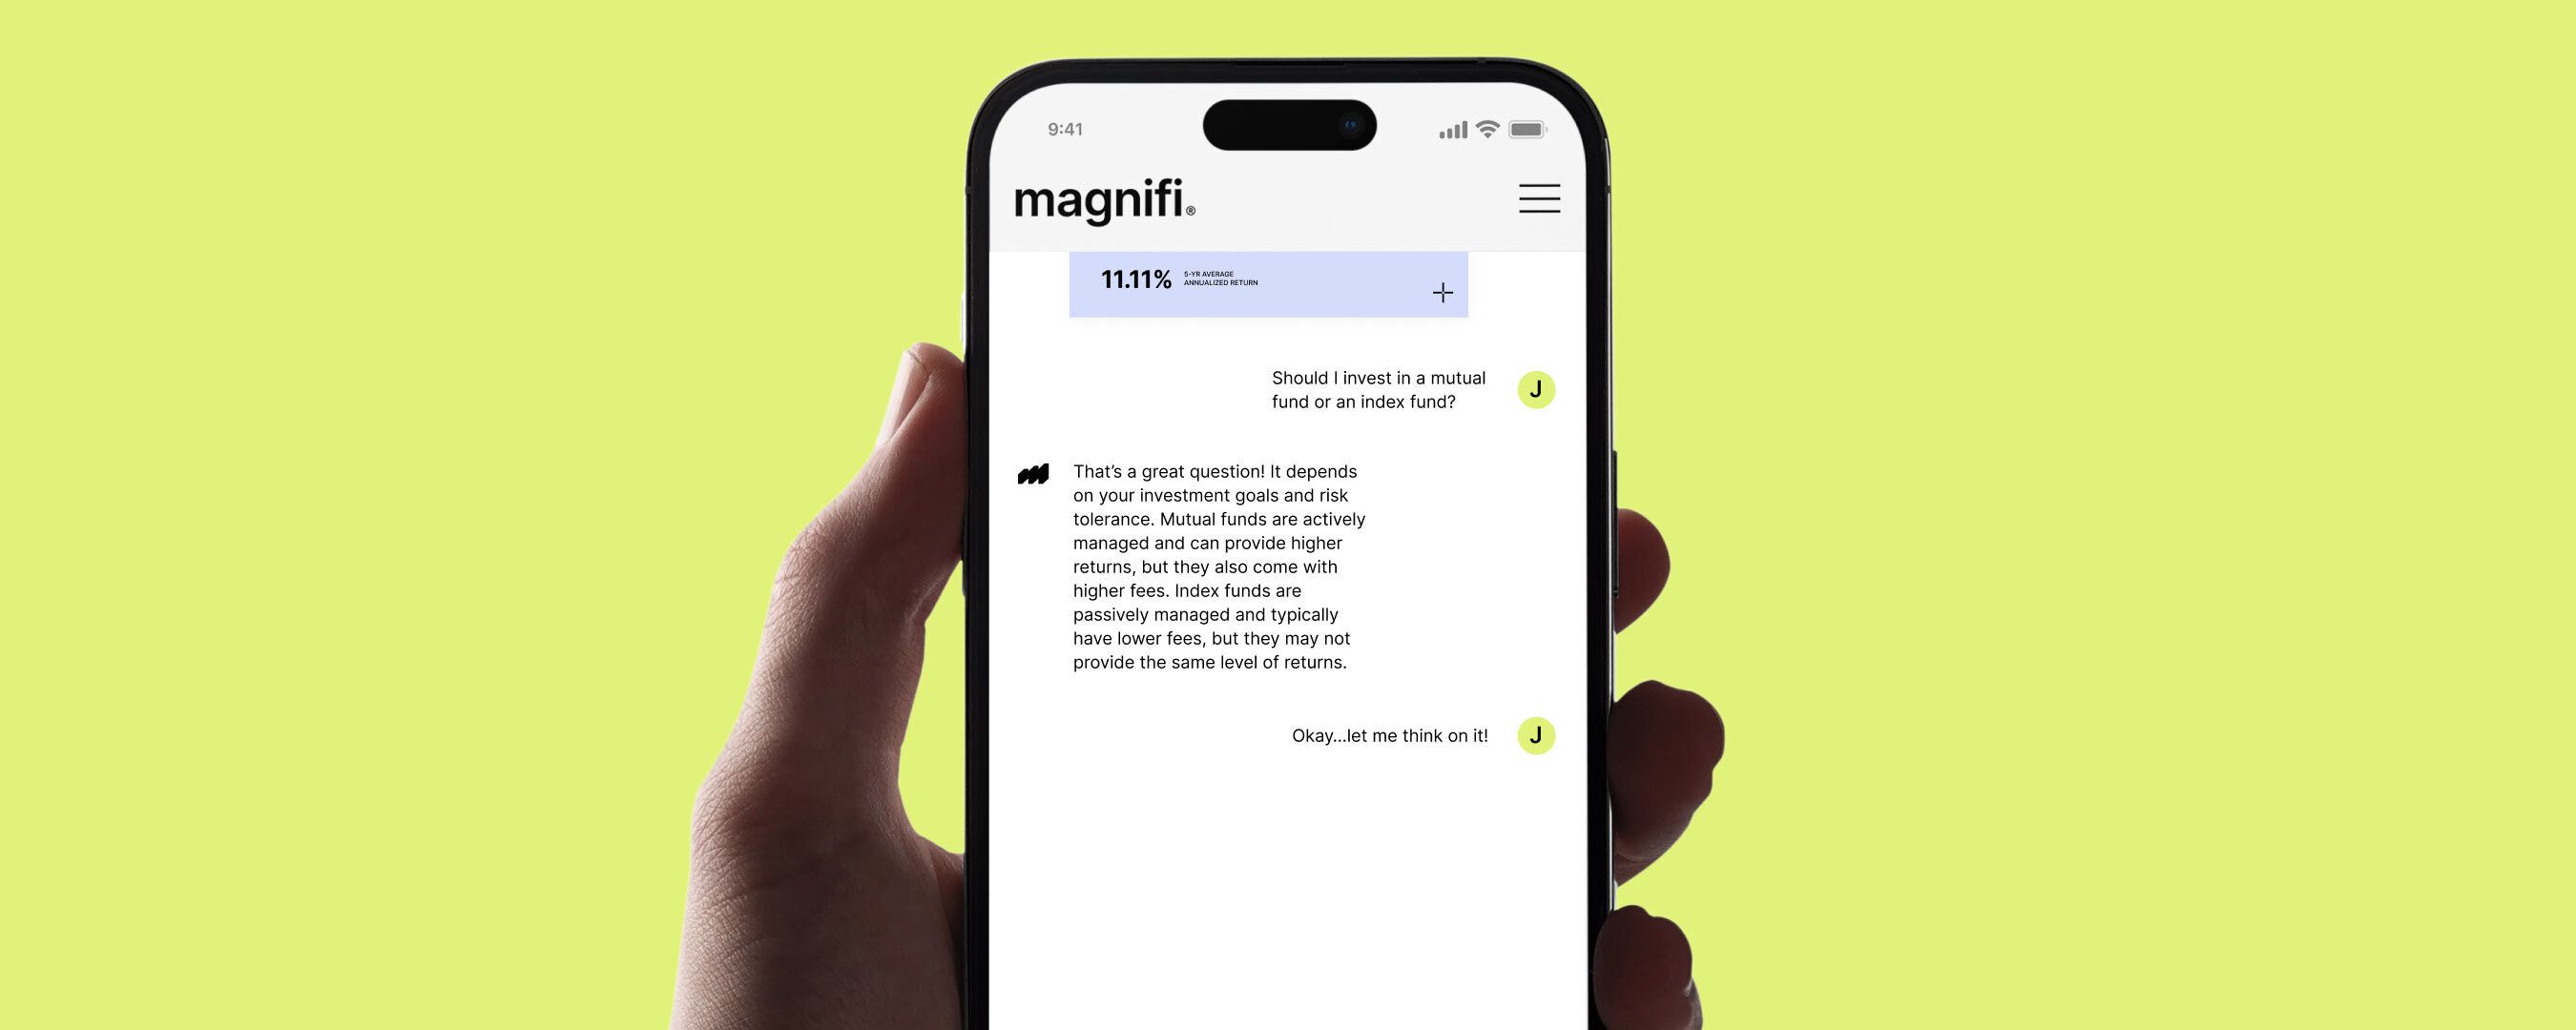 Magnifi app featuring mutual fund information